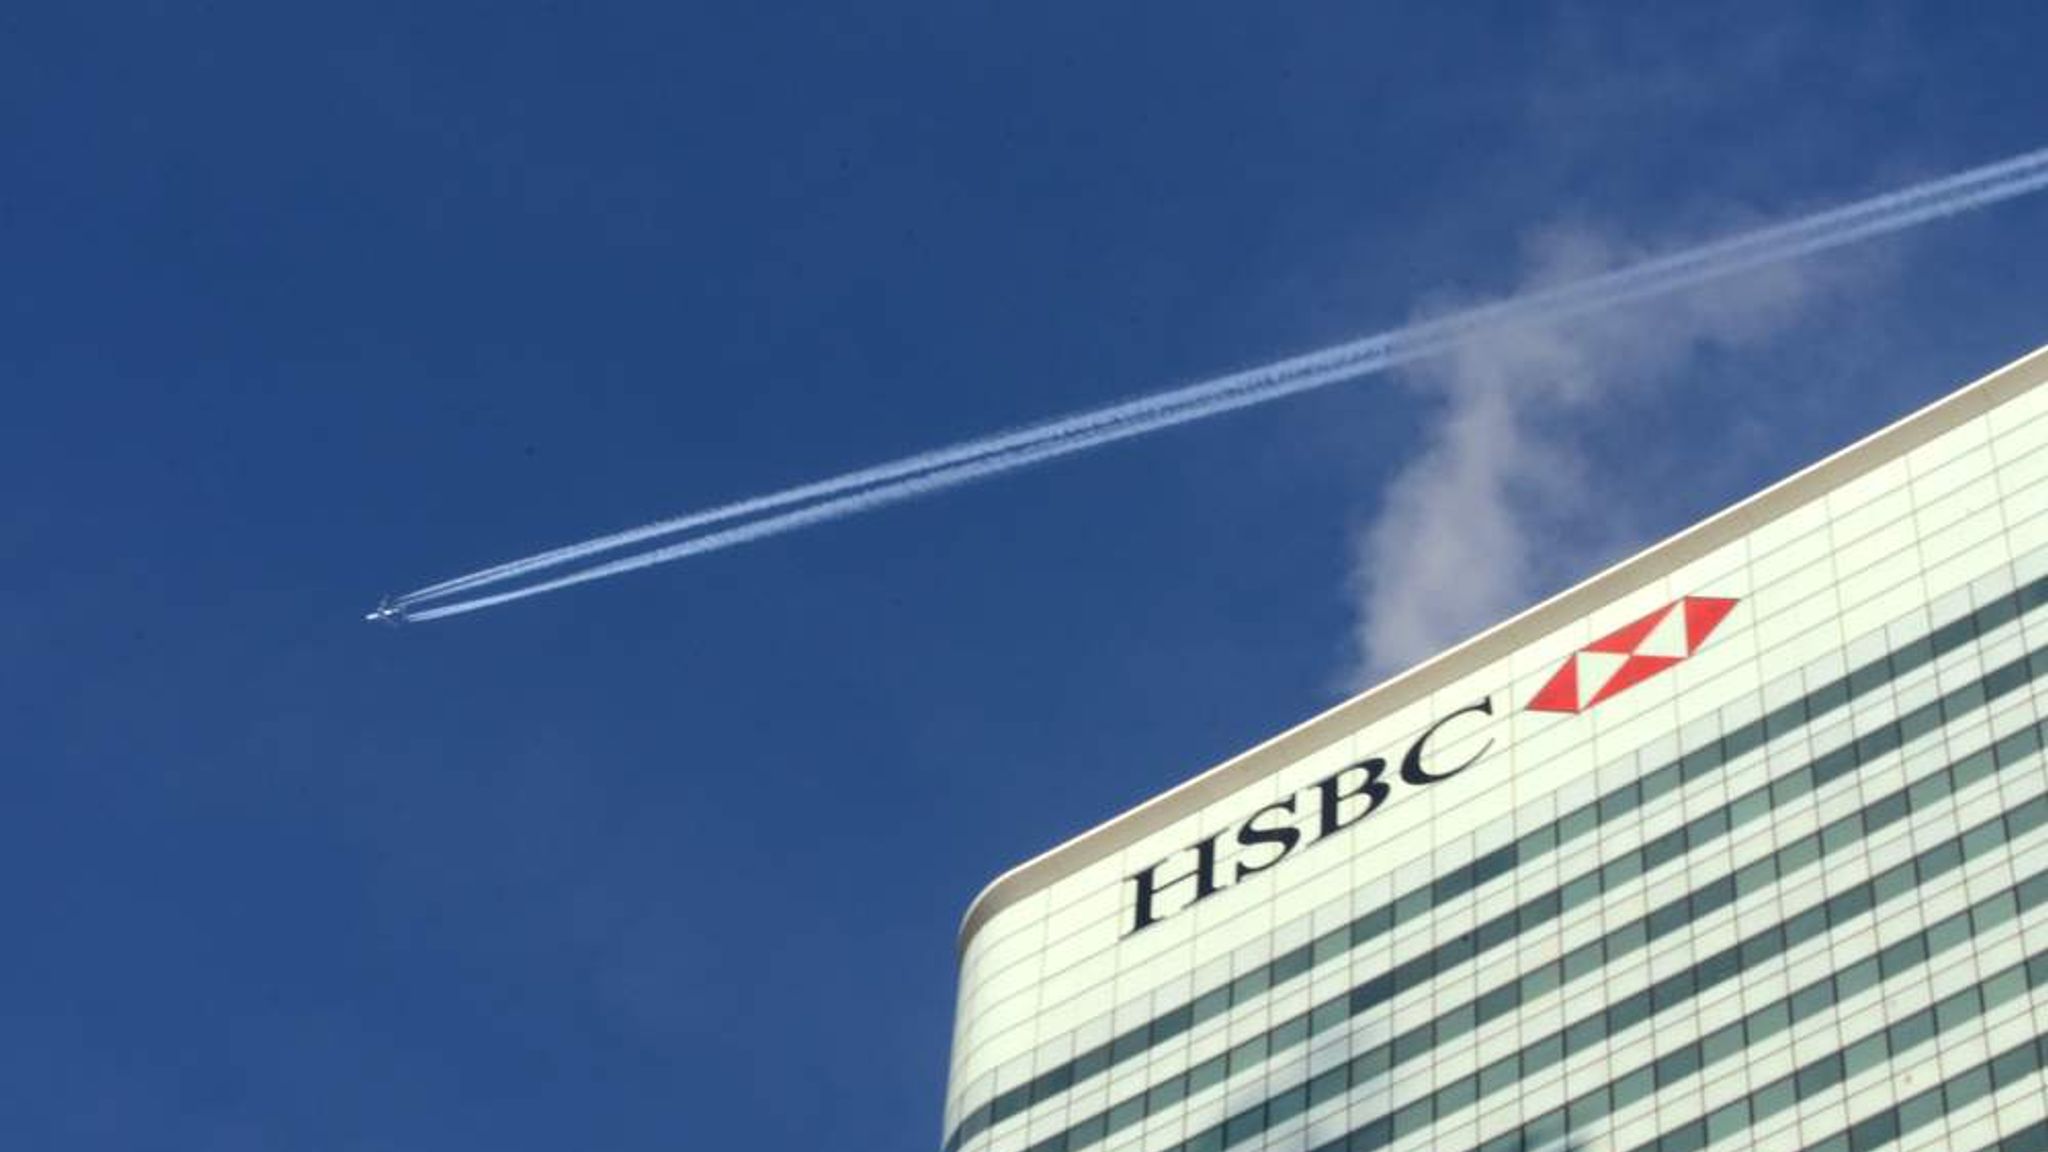 Hsbc Directors Quit In Protest At Jail Threat Business News Sky News 8559